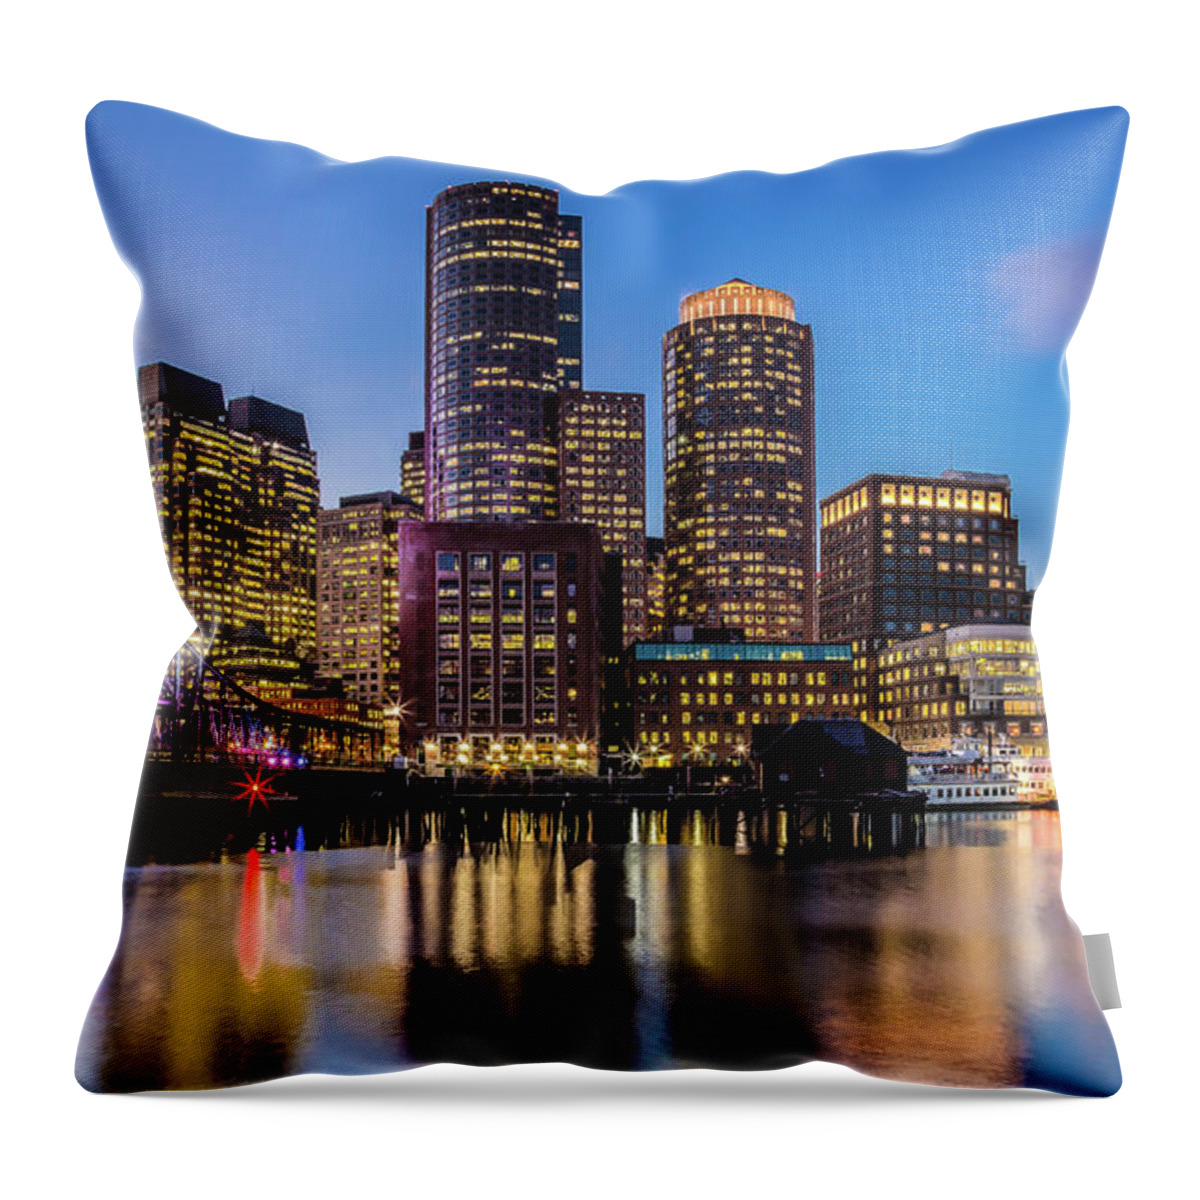 Downtown District Throw Pillow featuring the photograph Boston Skyline At Sunset by (c) Swapan Jha